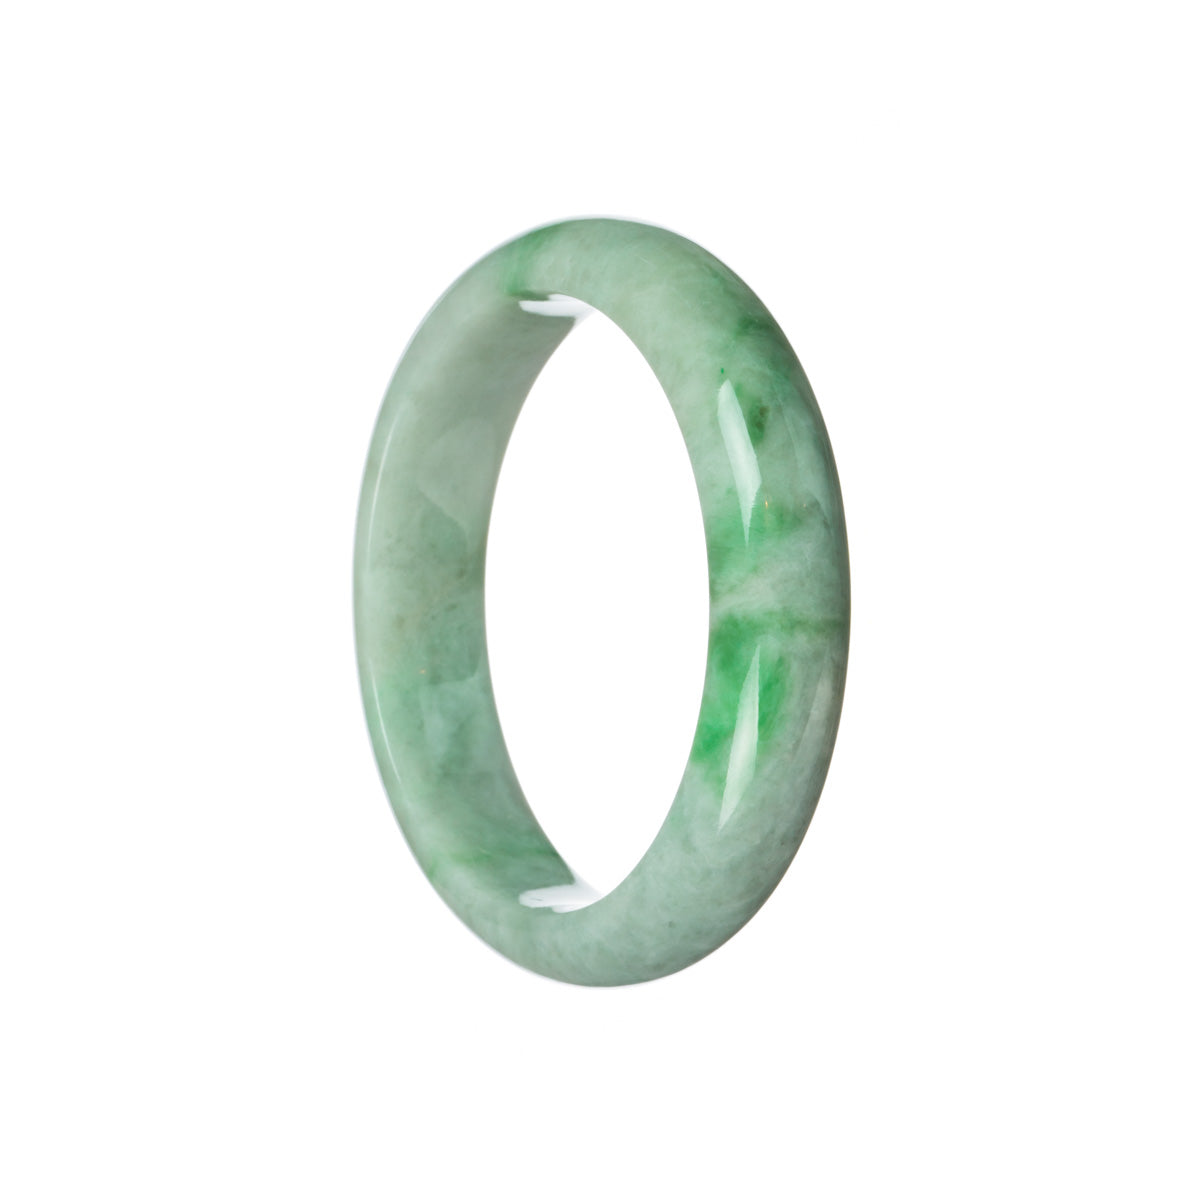 A close-up image of a white jade bangle bracelet with a half-moon shape, showcasing its luxurious texture and vibrant emerald green hue.